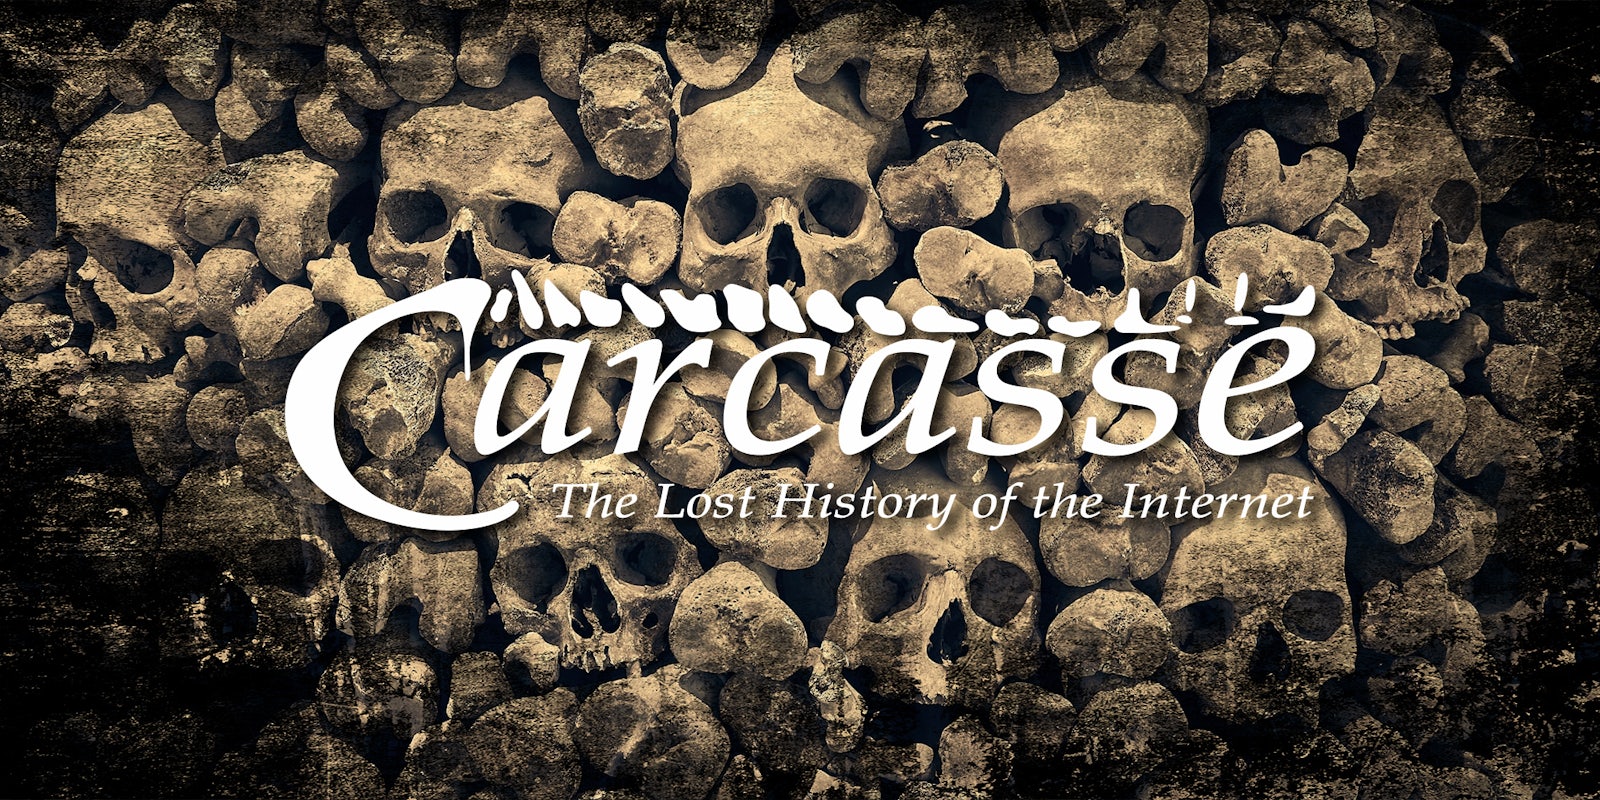 Wall of human skulls and bones with 'Carcasse - The Lost History of the Internet'